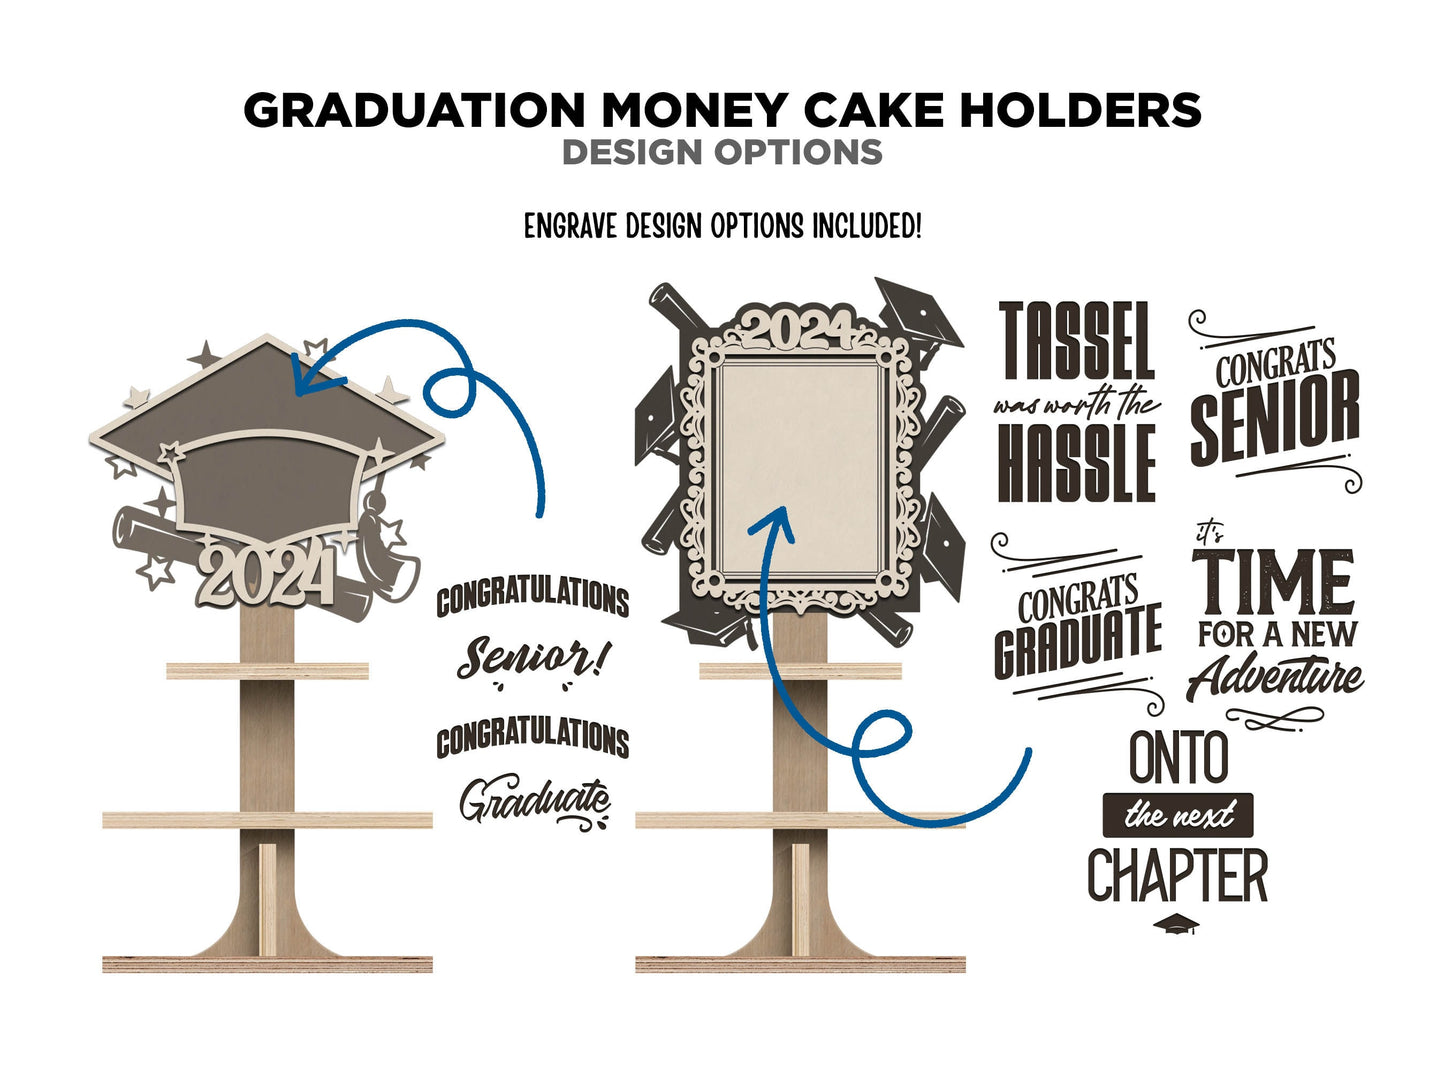 Graduation Money Cake Holders - Includes 6 Designs - Fits all Material thickness - Tested on Glowforge & Lightburn